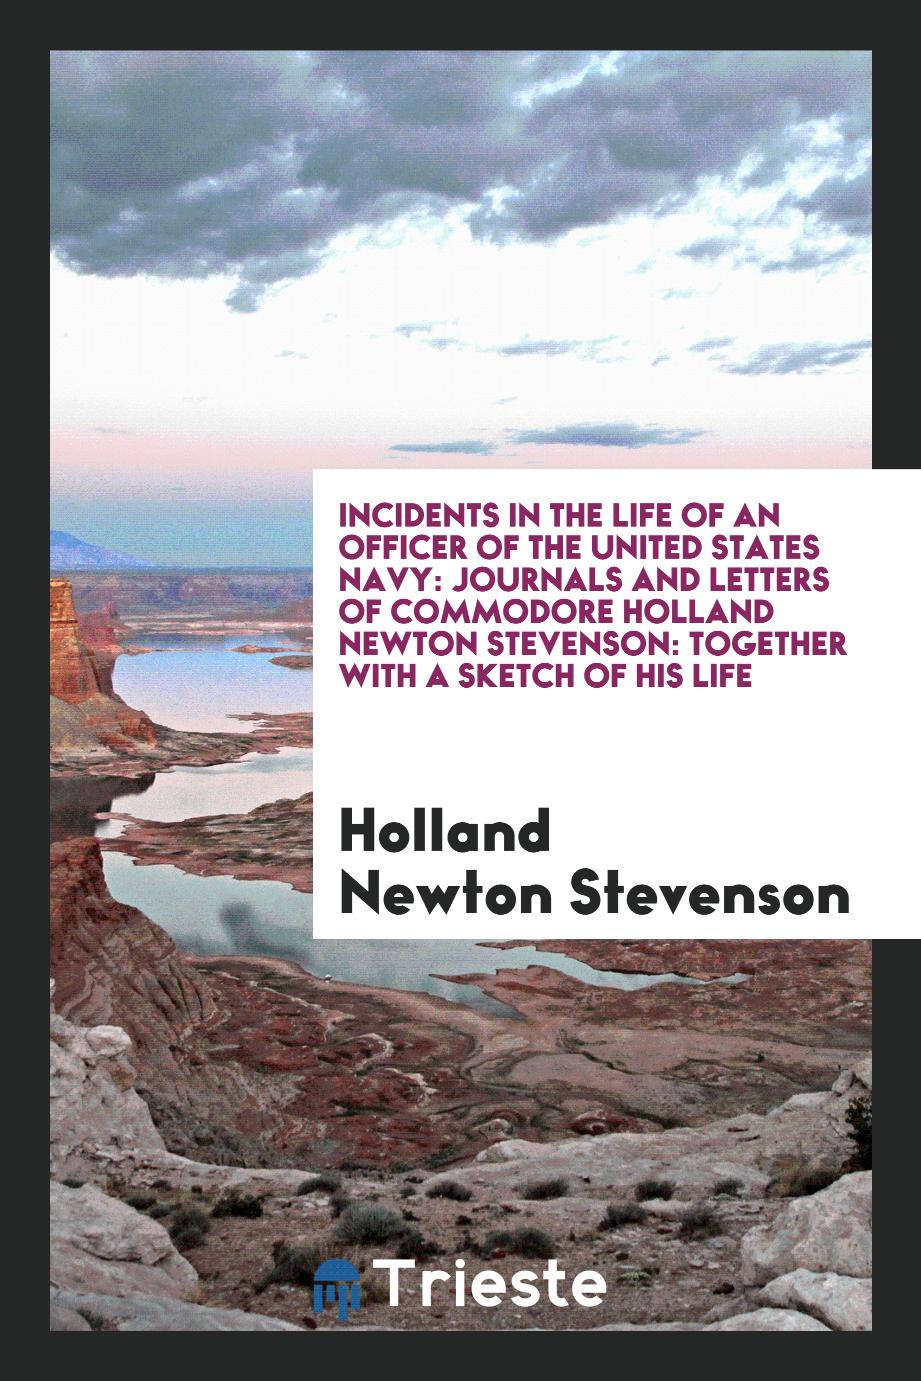 Incidents in the Life of an Officer of the United States Navy: Journals and Letters of Commodore Holland Newton Stevenson: Together with a Sketch of His Life